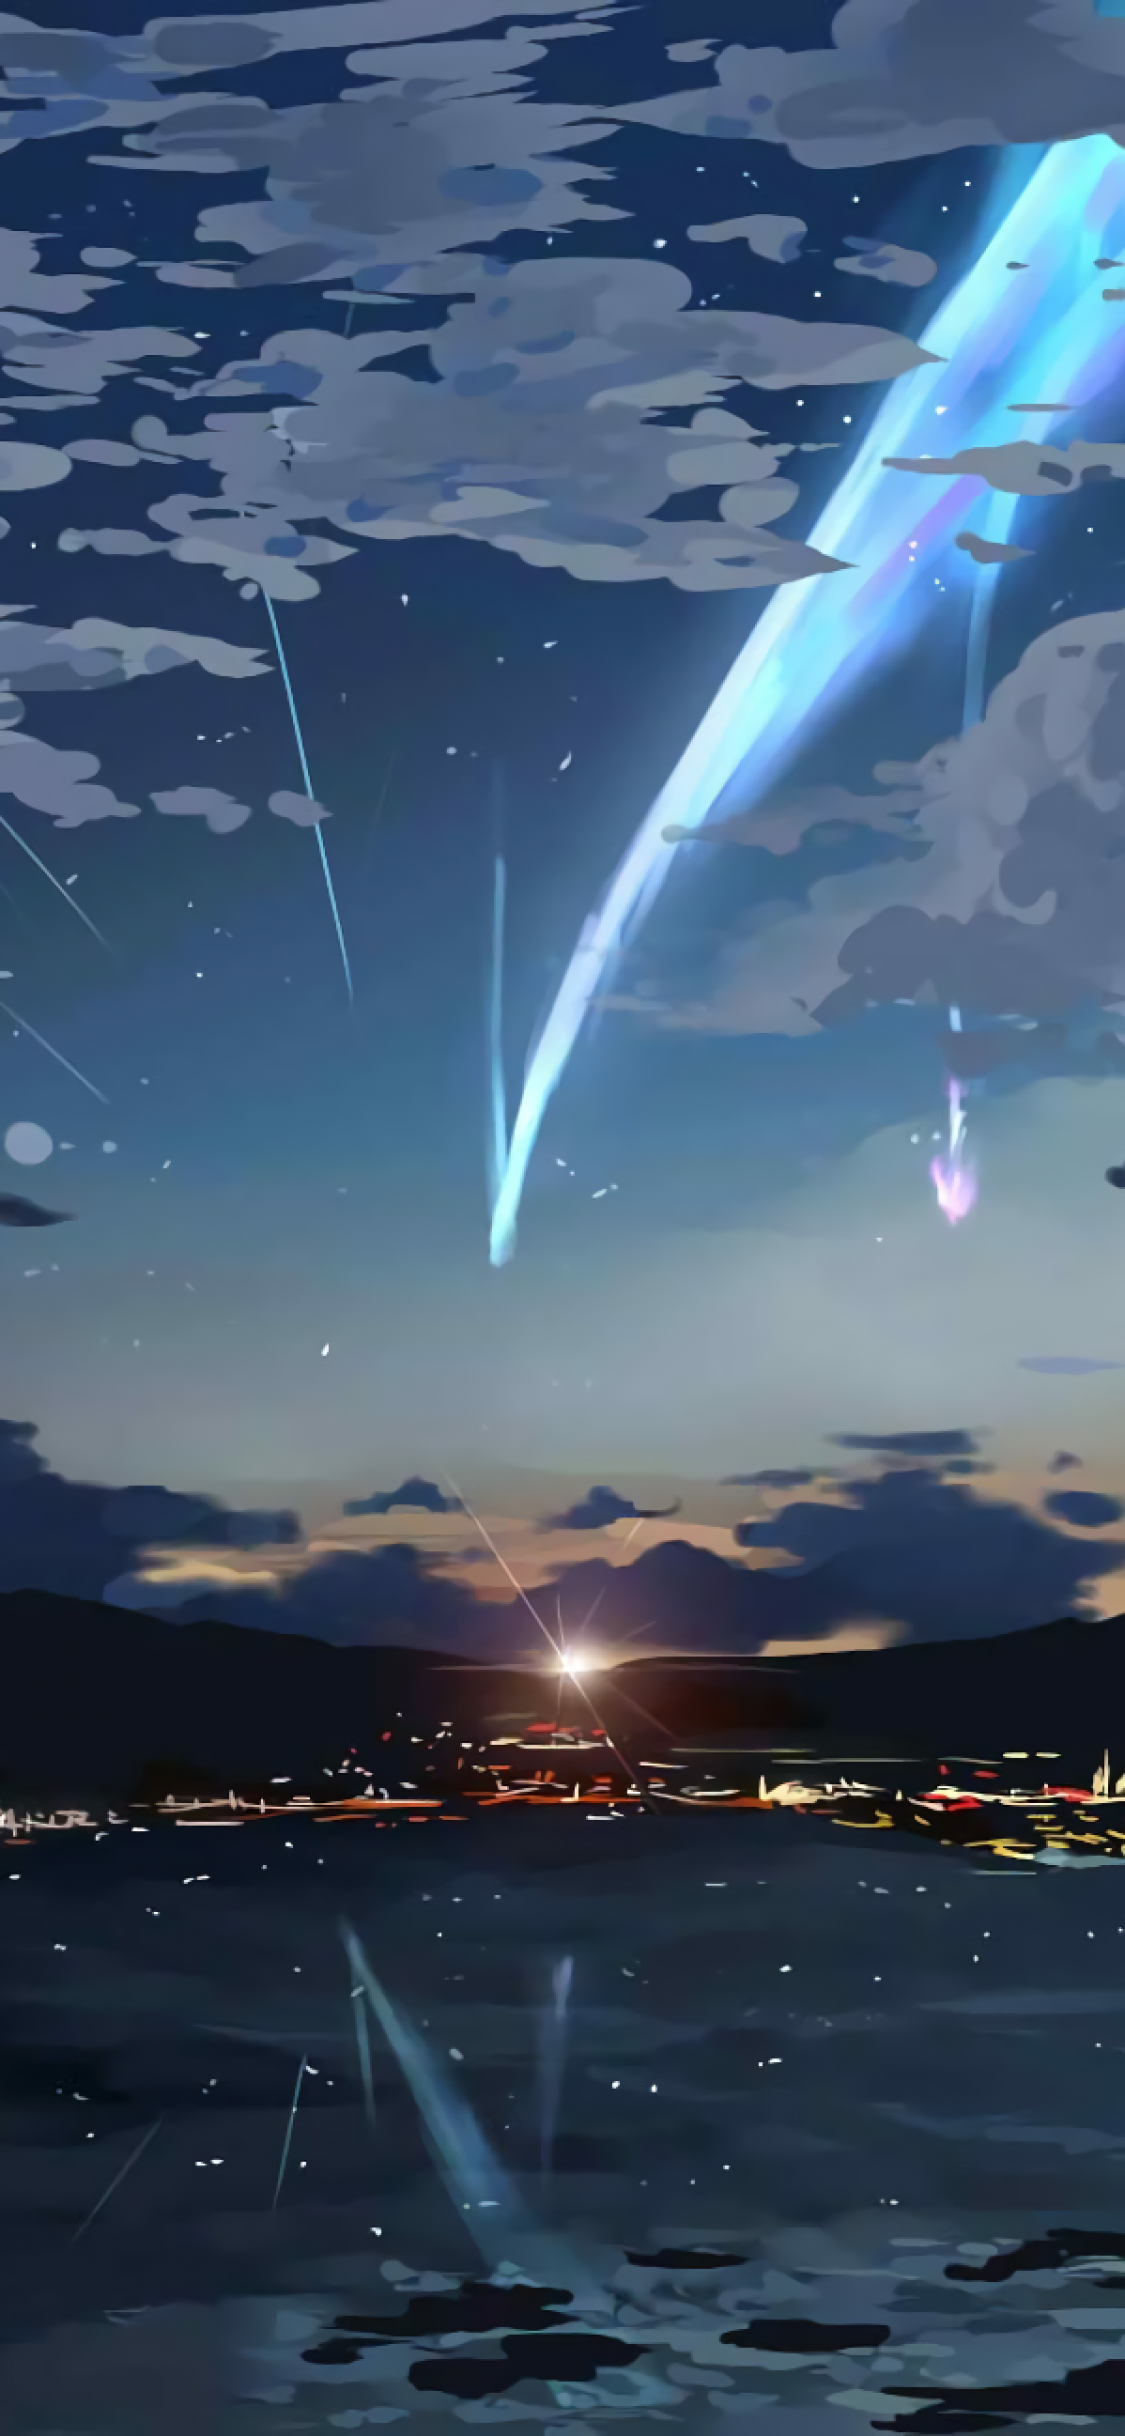 Your Name 4k iPhone Wallpapers - Wallpaper Cave